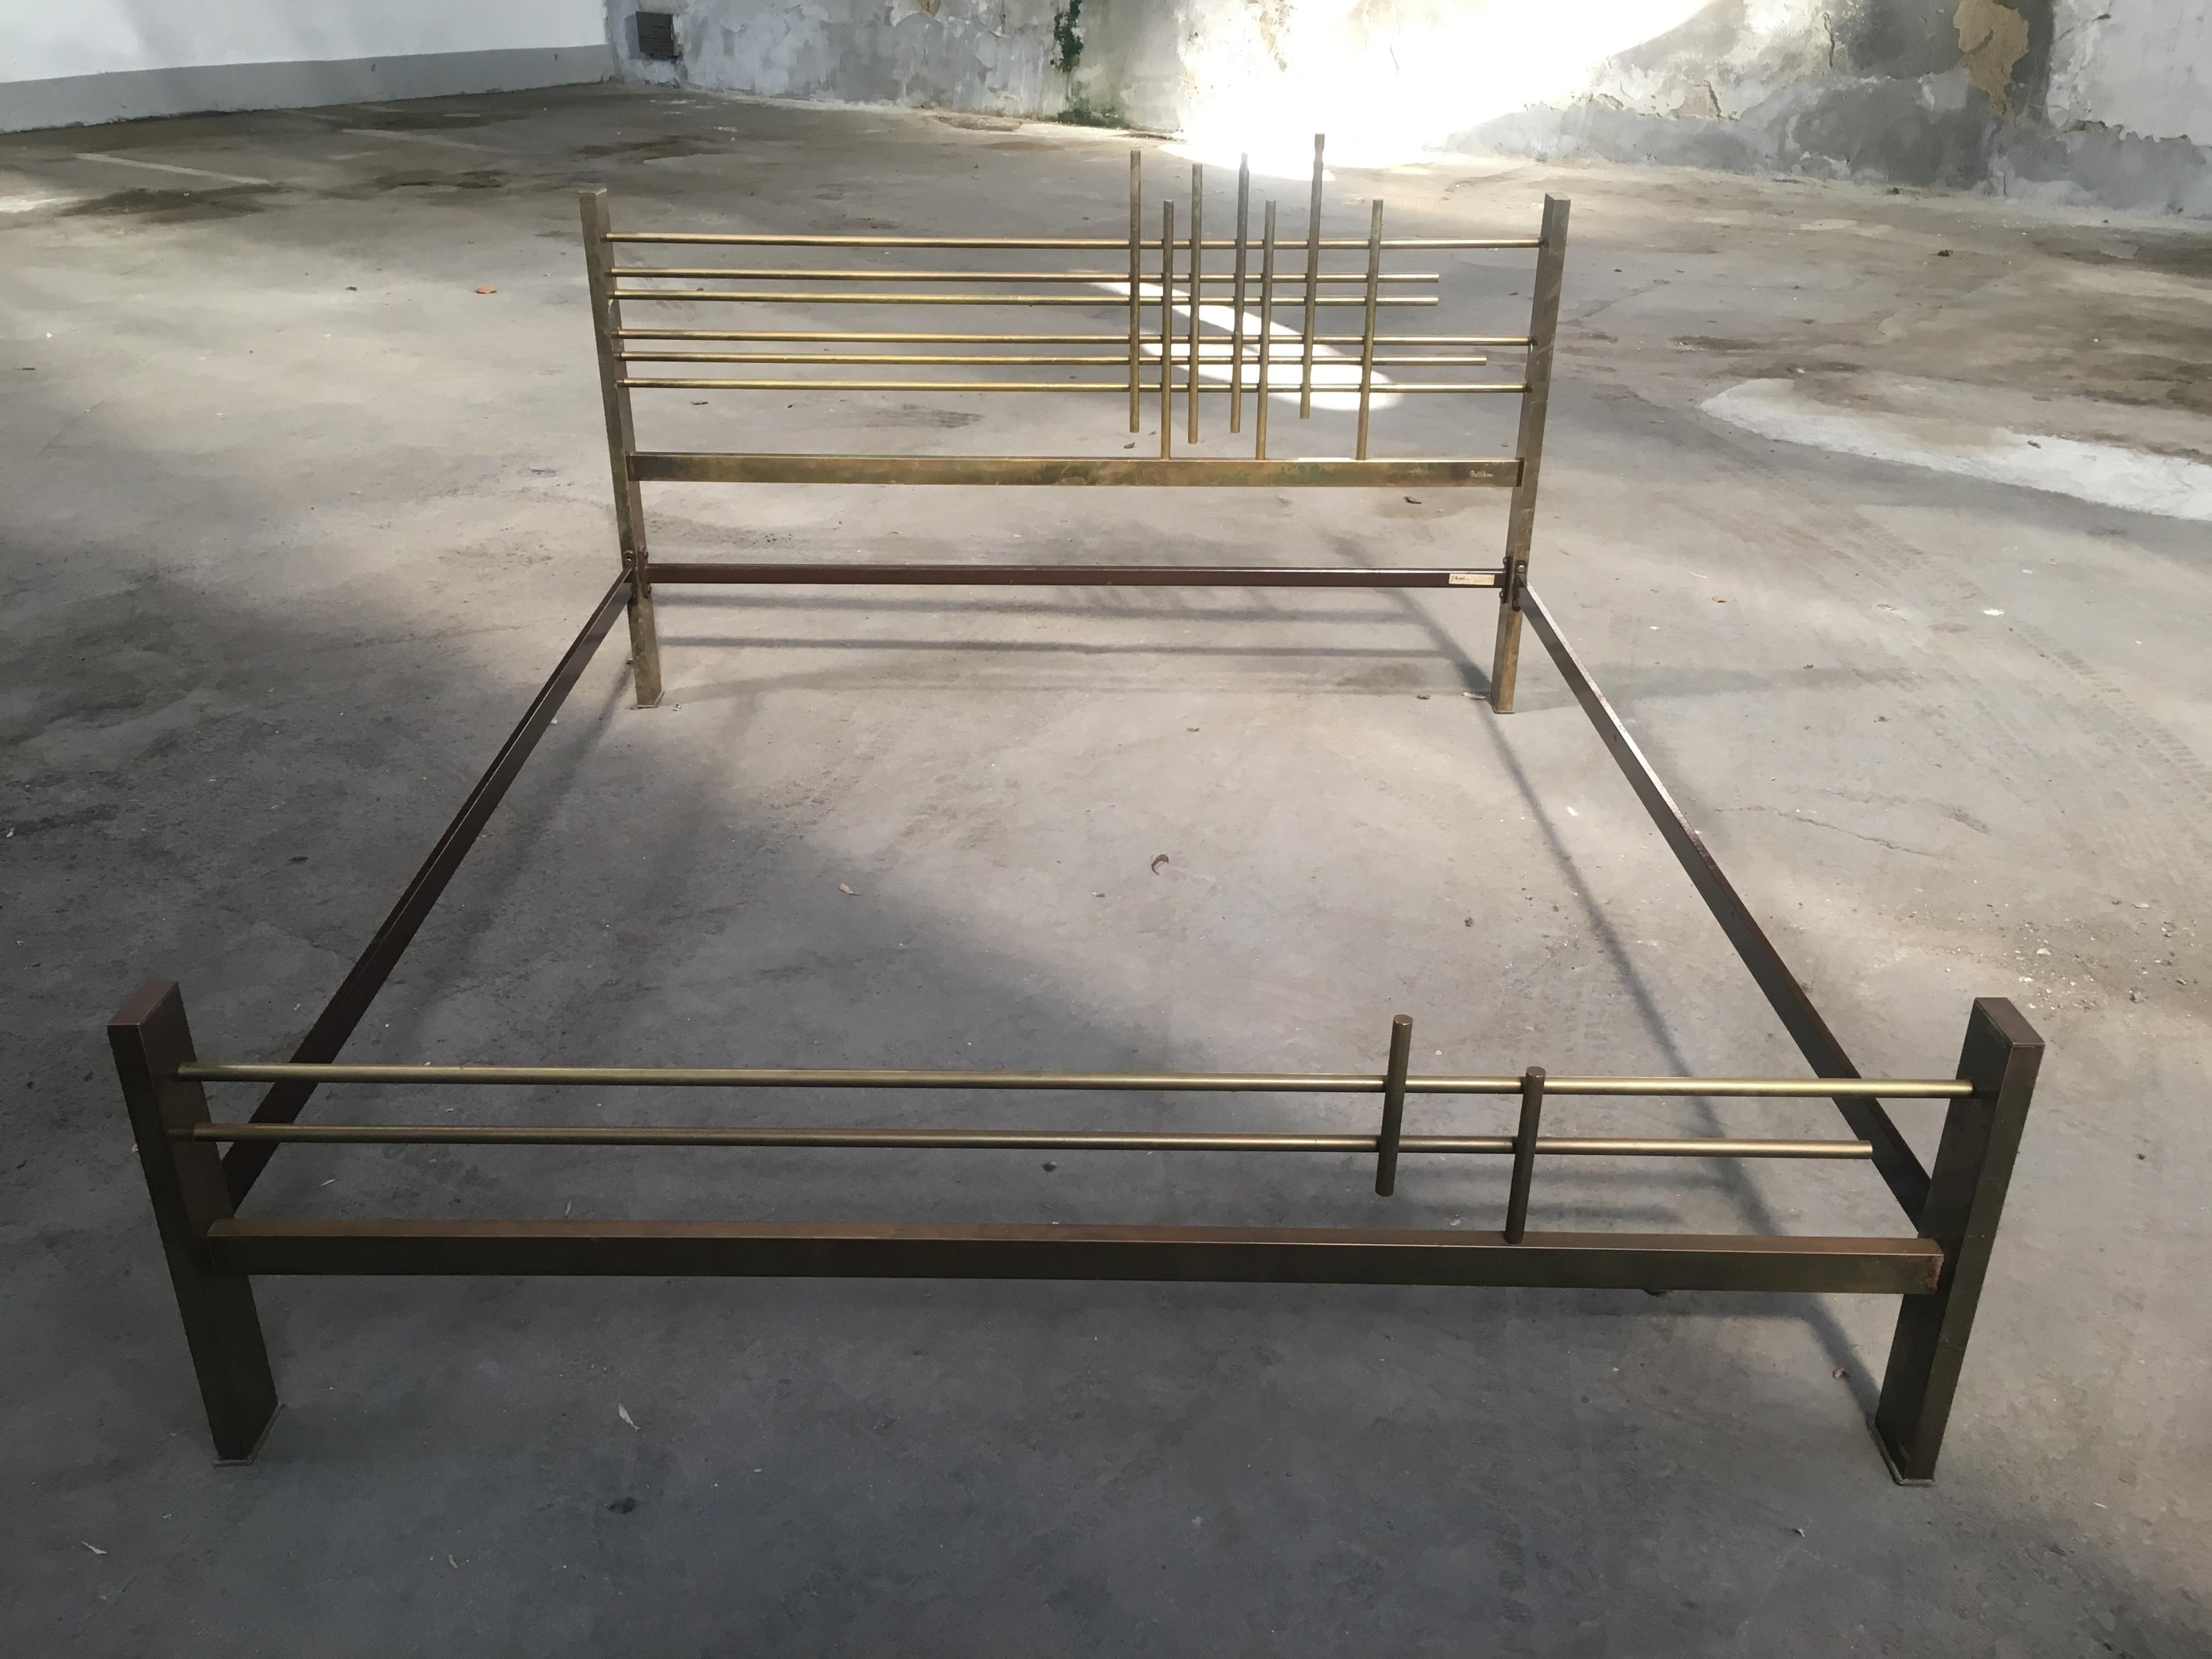 Mid-Century Modern Italian Solid Brass Double Bed by Pulli, 1960s.
This bed needs a bed net of 170 x 200 cm.